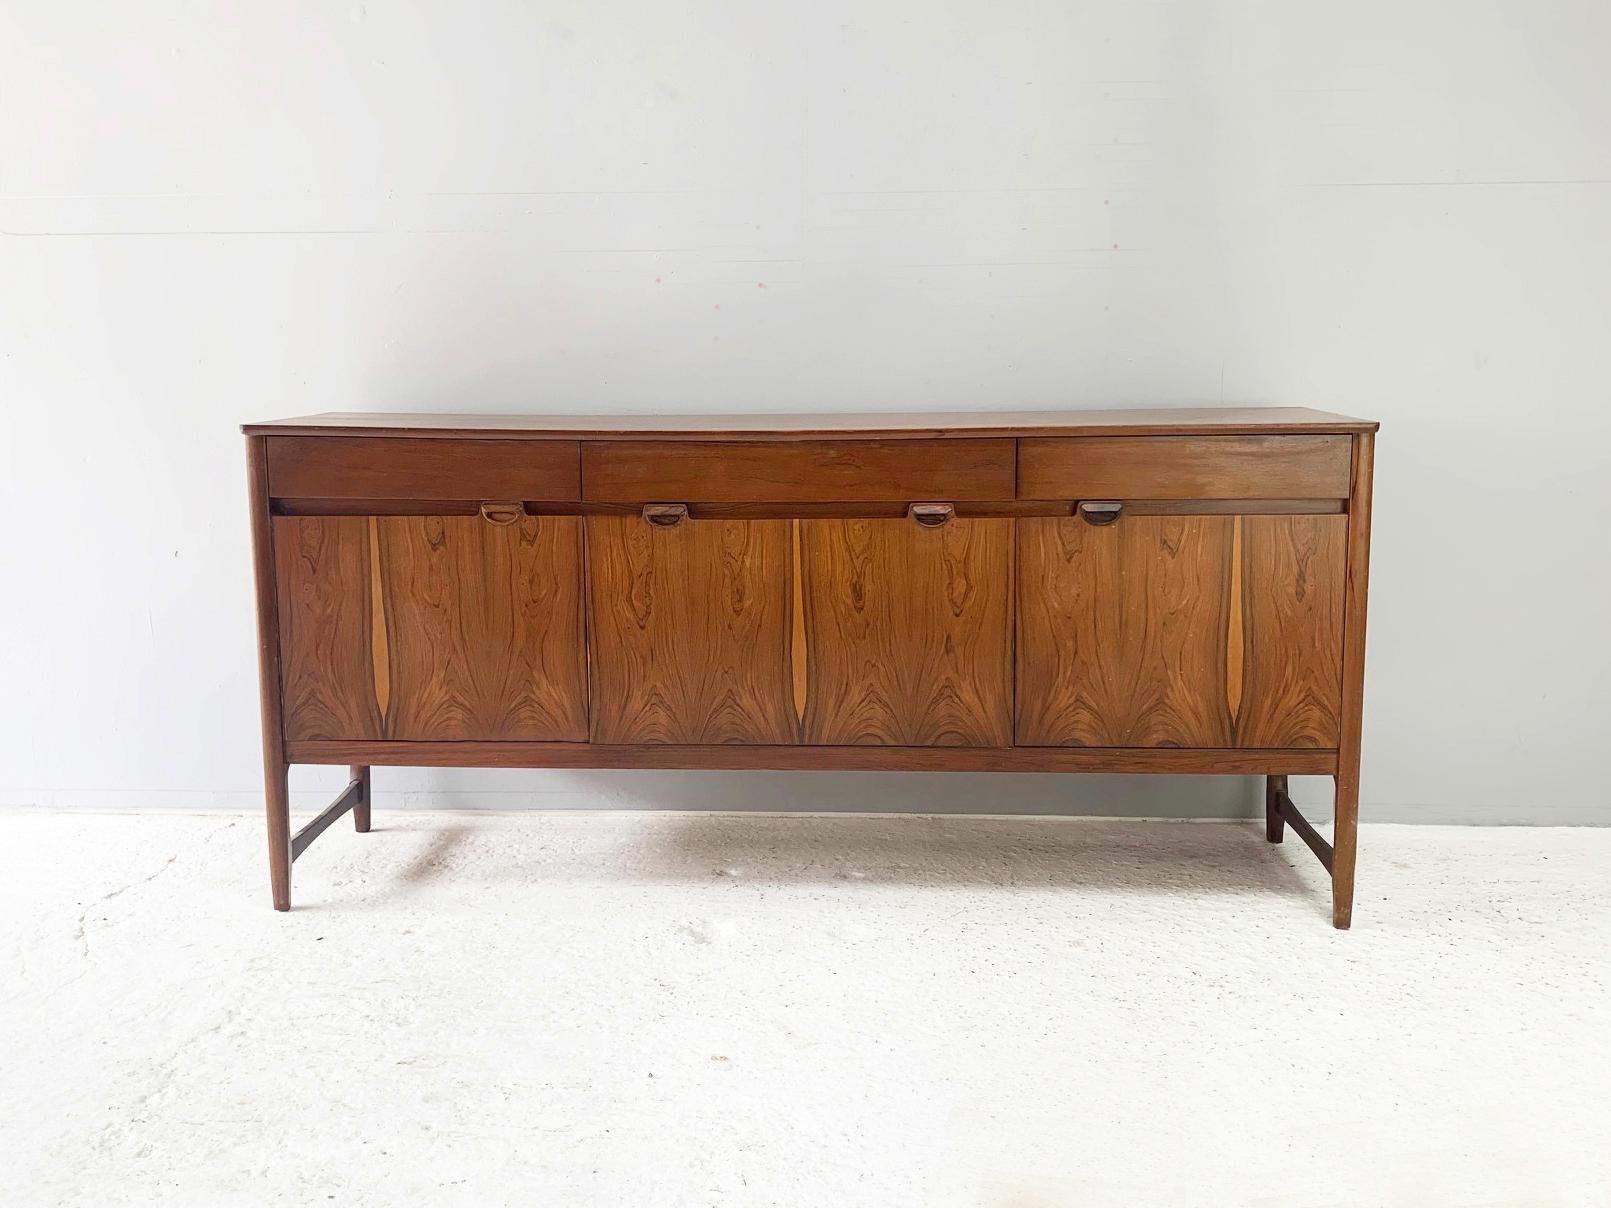 A rare Rosewood and solid teak sideboard by respected British maker Nathan Furniture, part of their premium ‘Caspian’ range.

Rectangular Rosewood top above three frieze drawers which are over a central fall flap drinks cabinet. Flanked by two